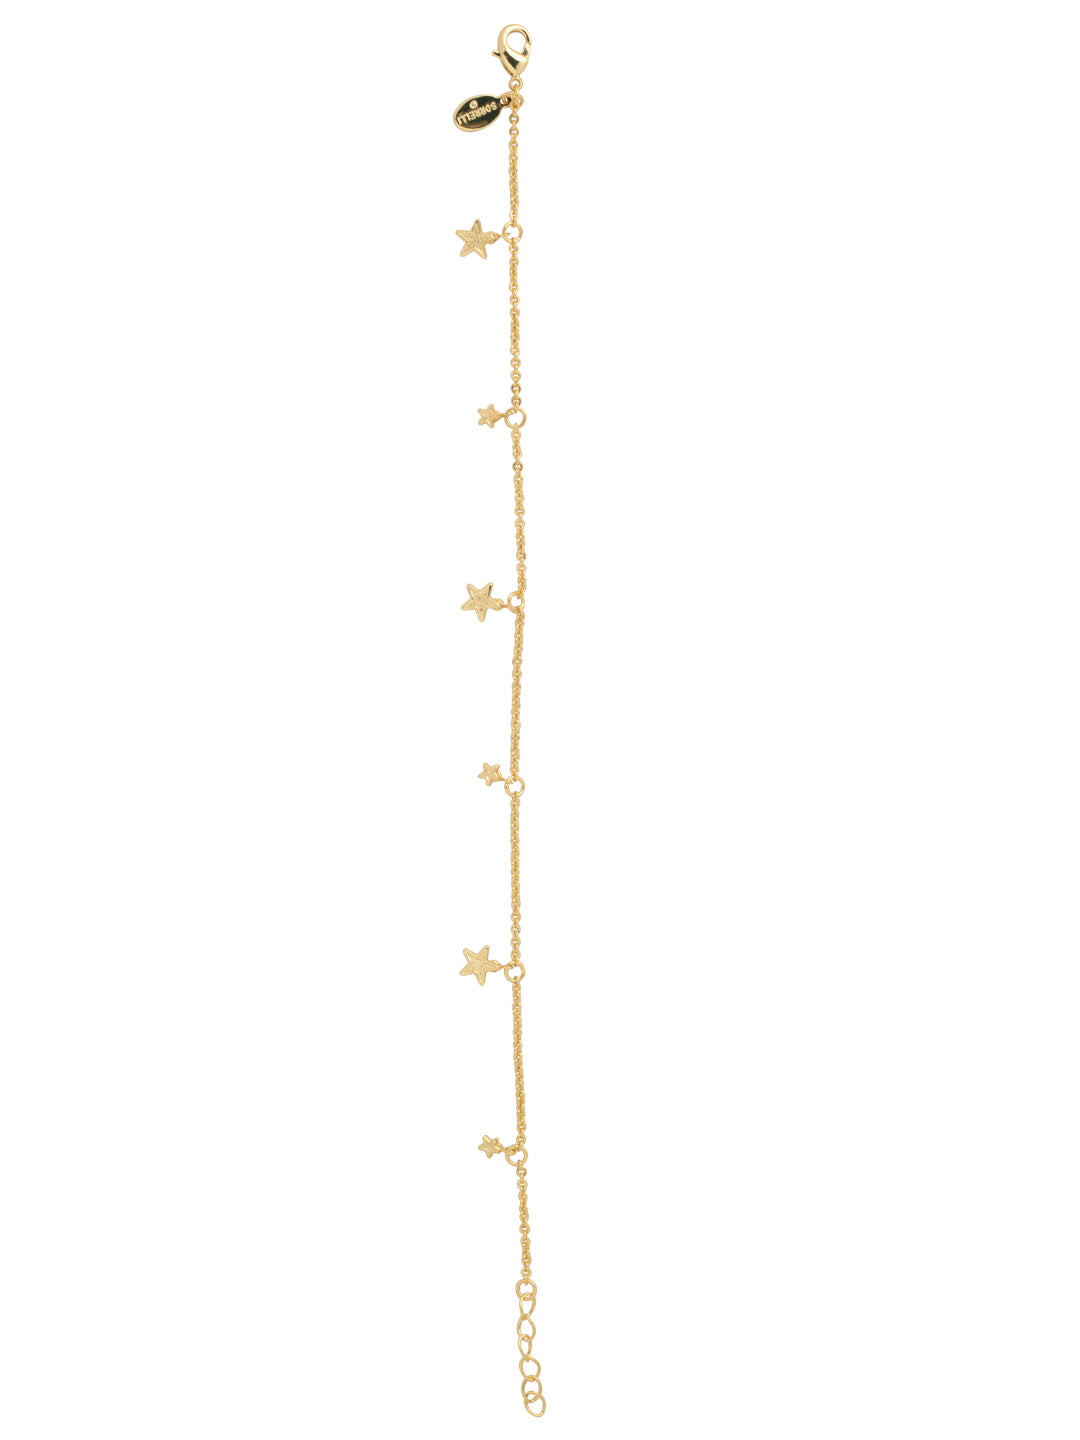 Asteria Anklet - AFM10BGMTL - <p>The Asteria Anklet features crystal-studded star charms on an adjustable chain, secured with a lobster claw clasp. From Sorrelli's Bare Metallic collection in our Bright Gold-tone finish.</p>